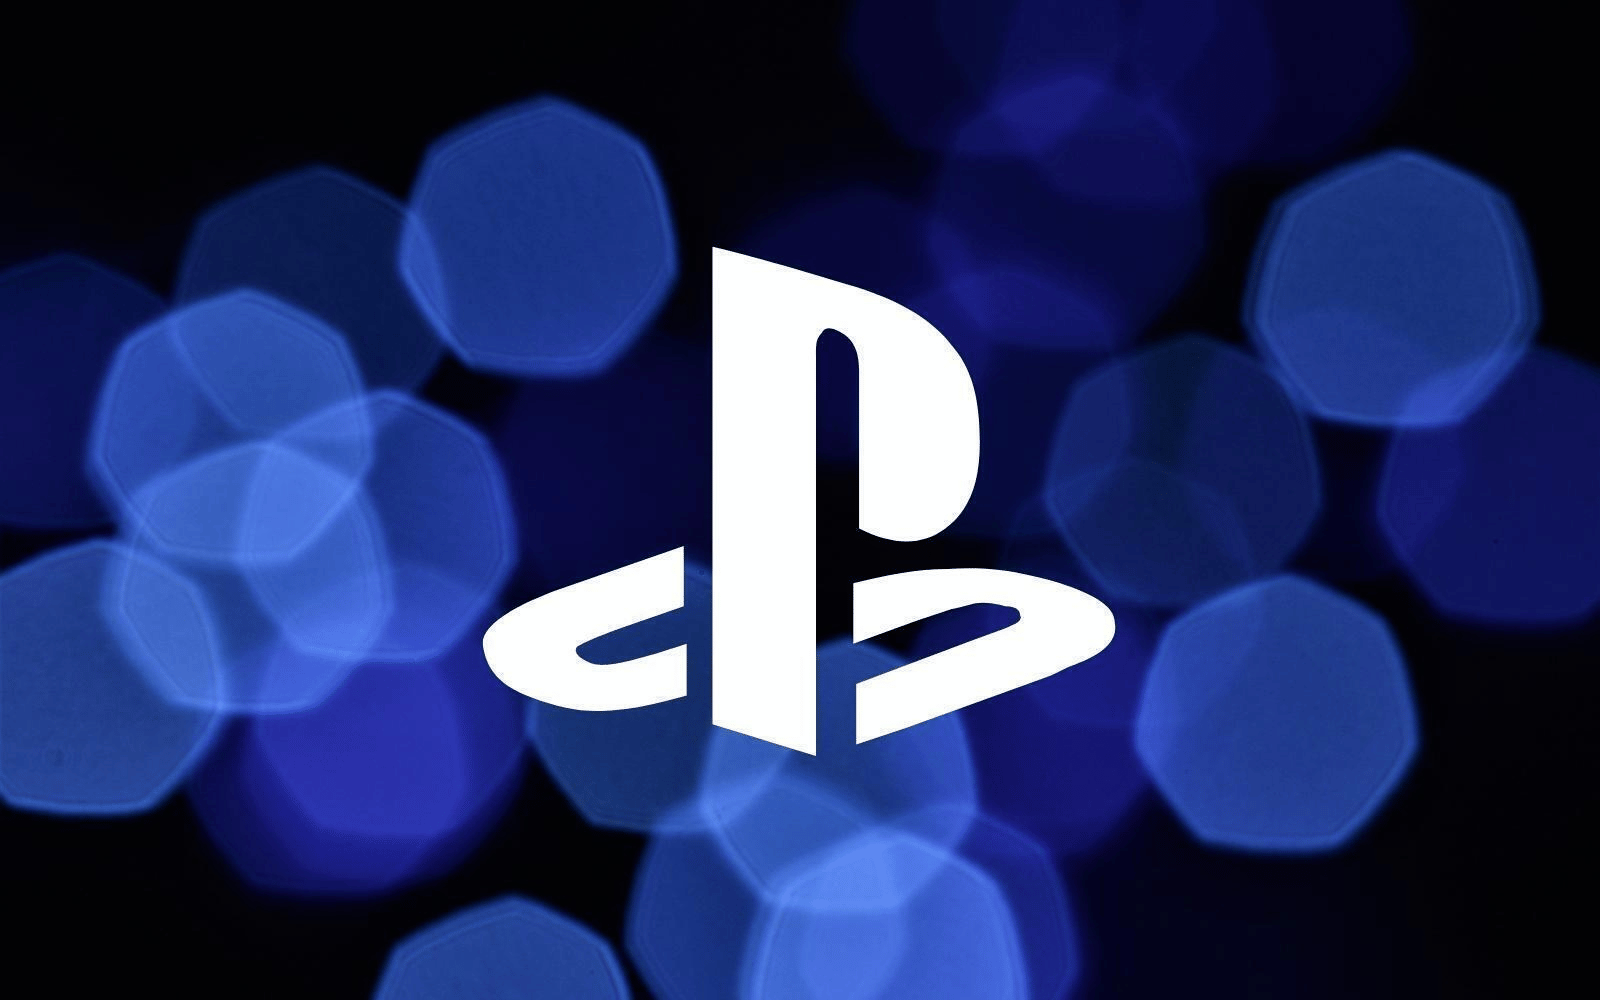 How to Set Parental Controls on the PlayStation 4